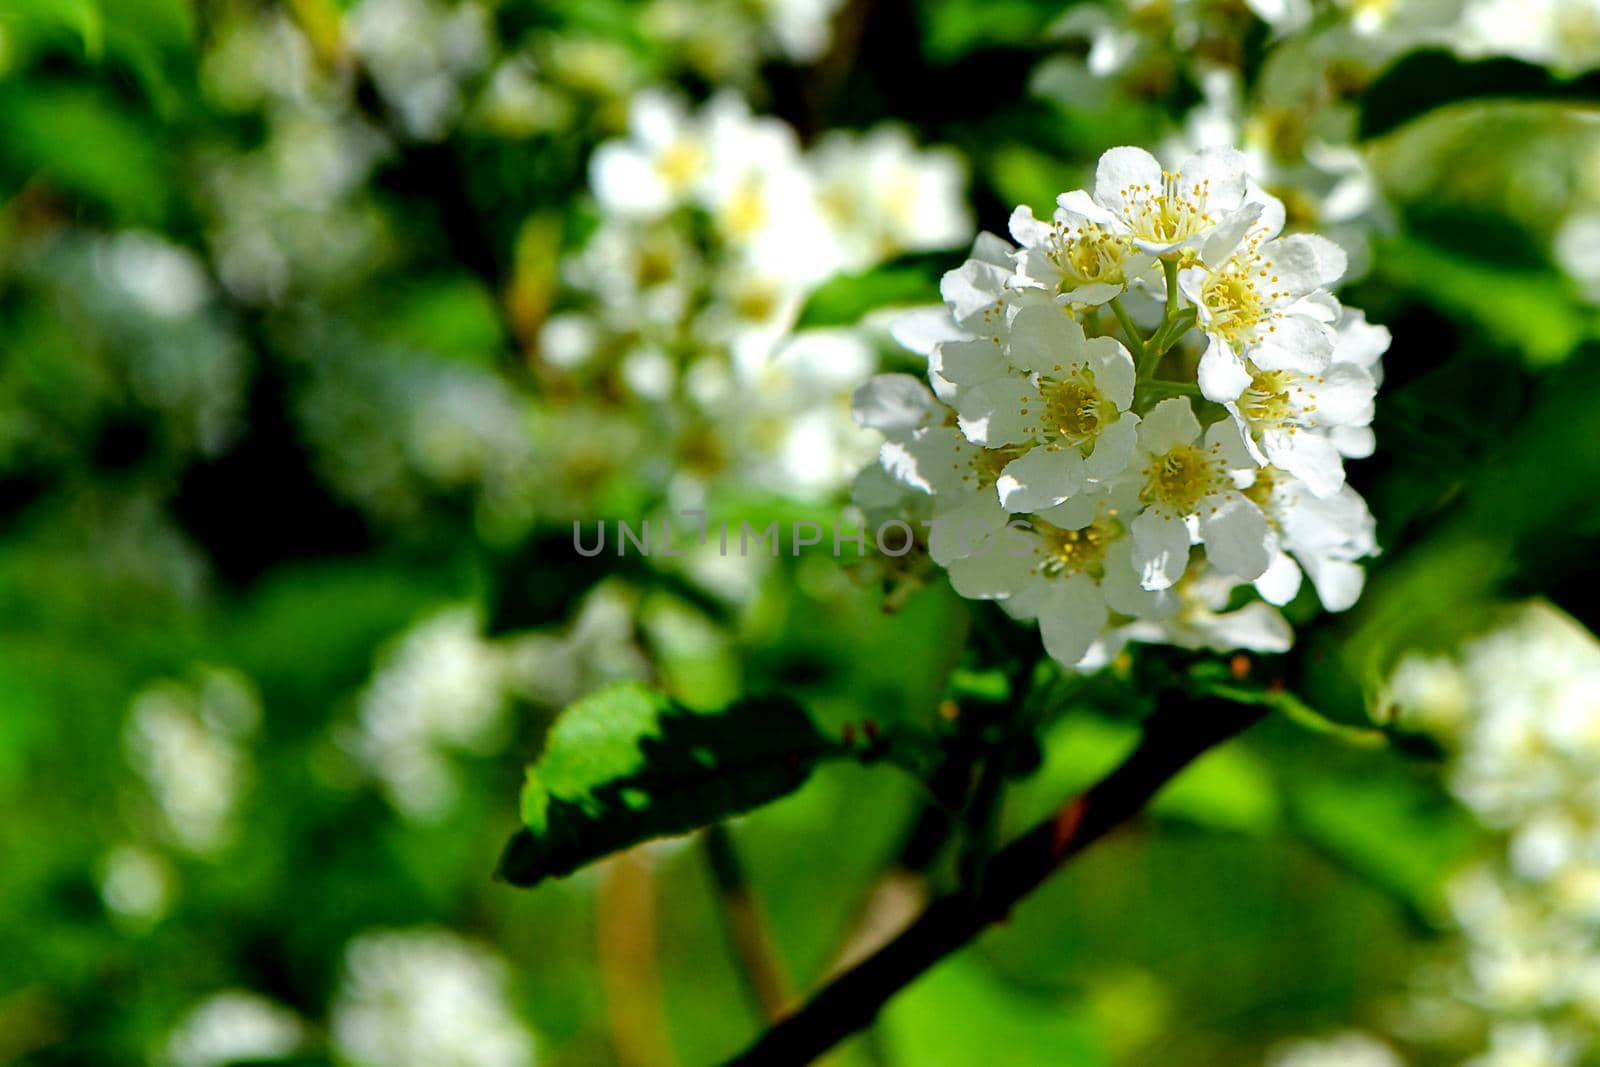 Flower Leafs of apple or cherry blossom in spring. Spring flower in a garden close up. High quality photo